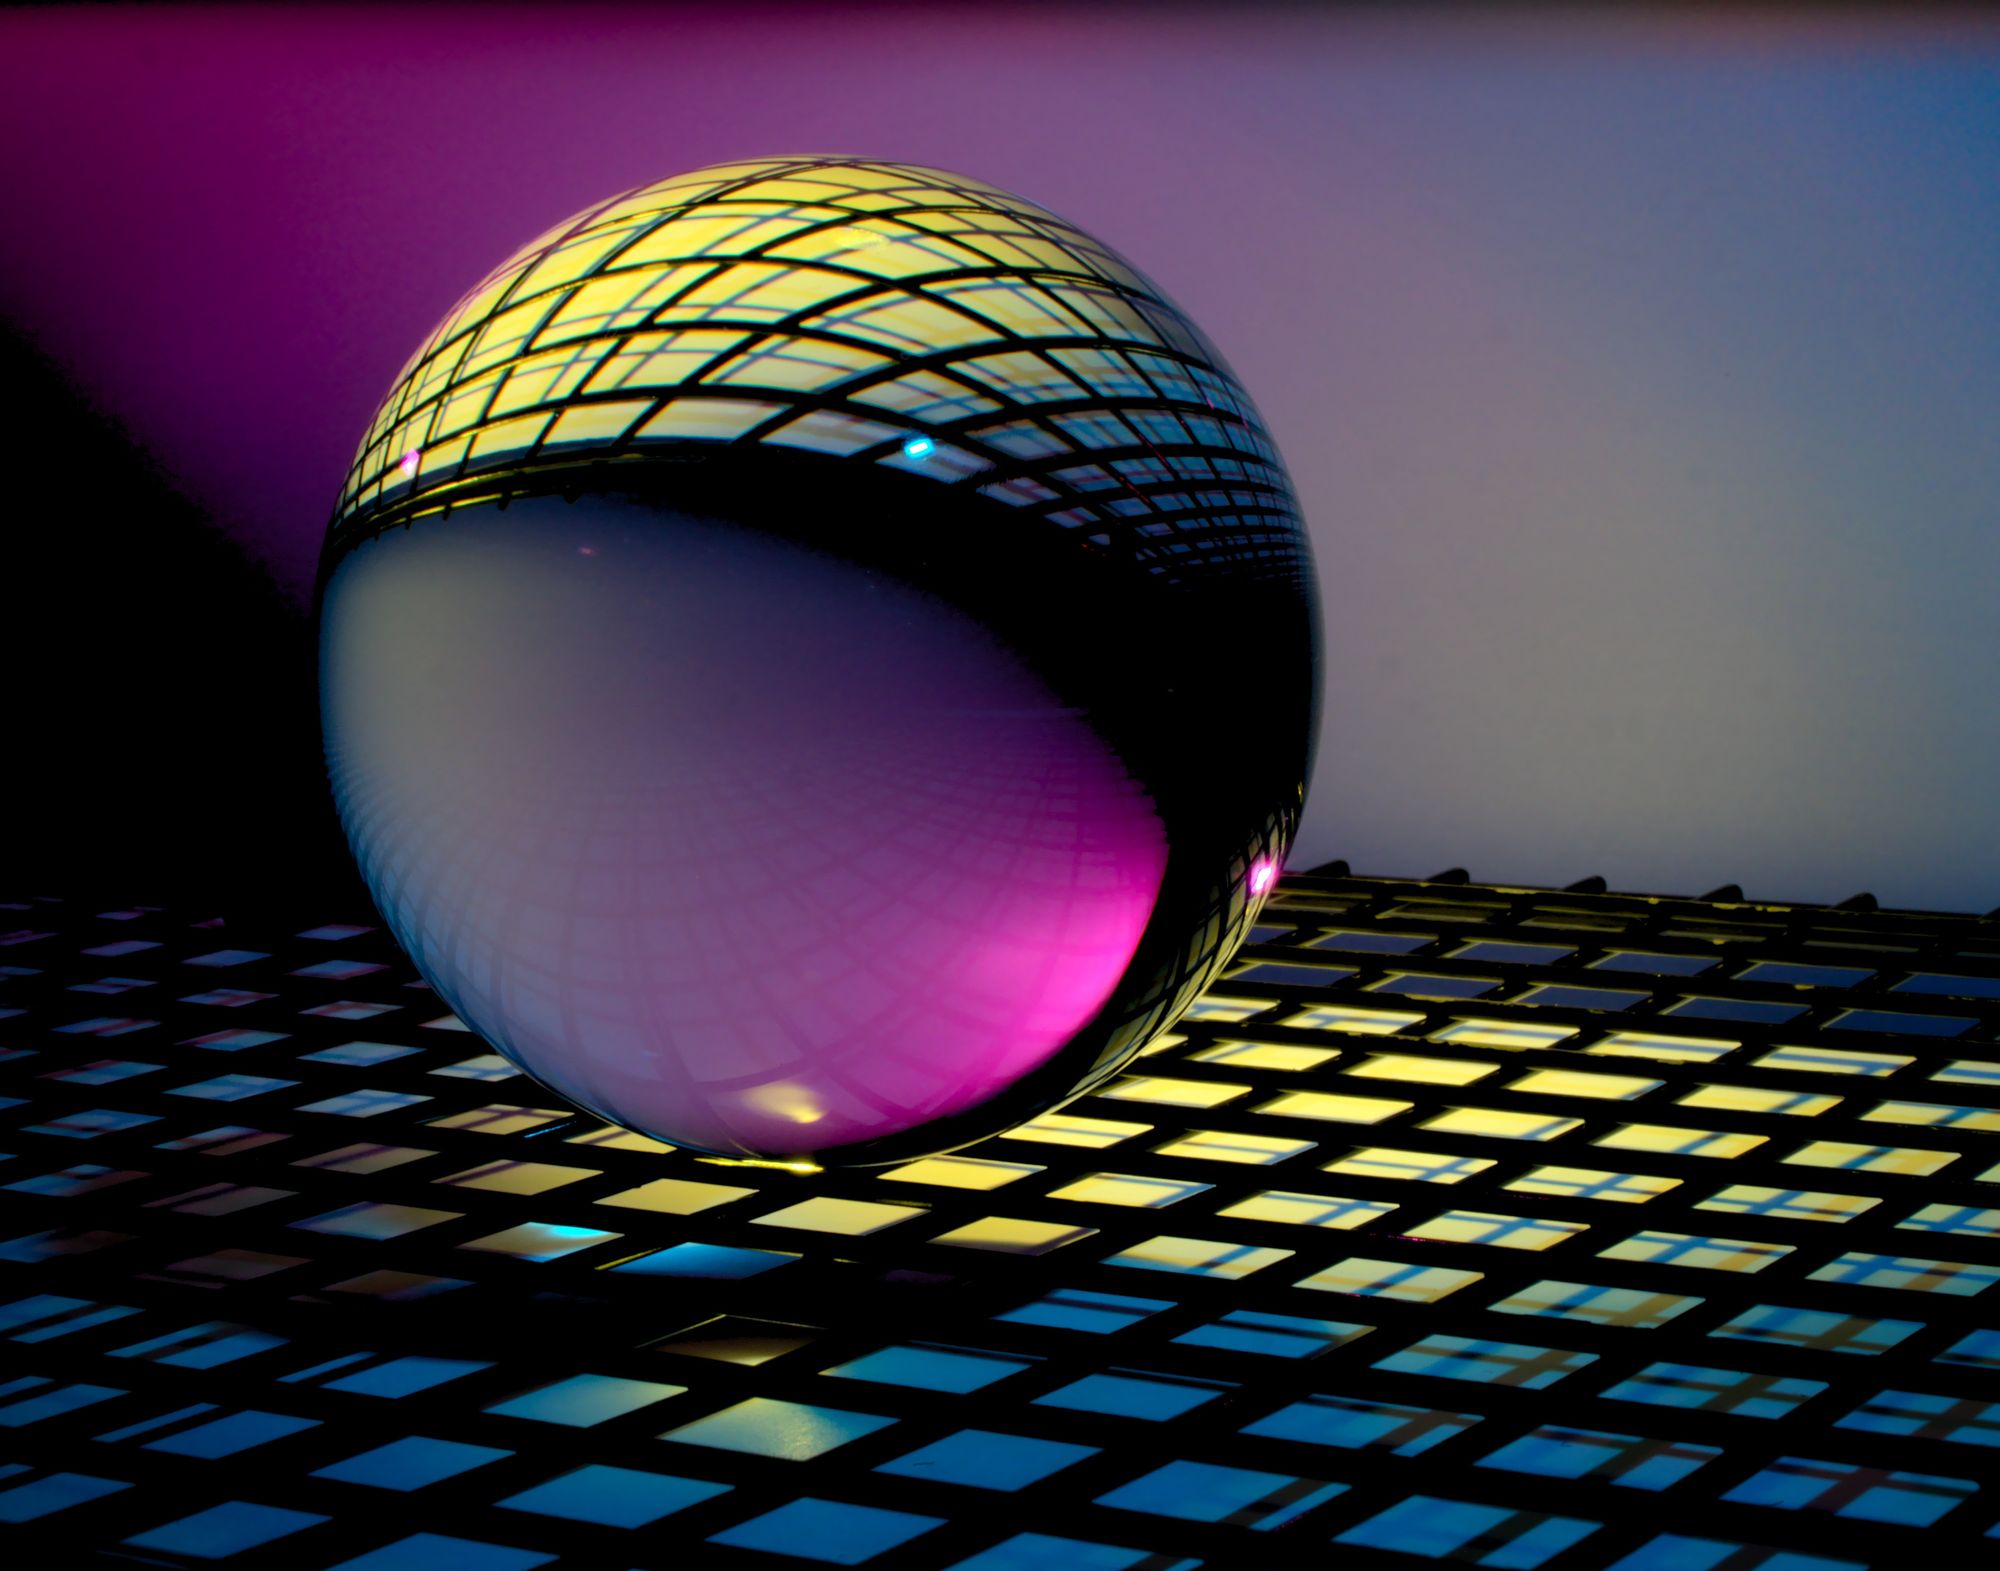 Colorful sphere sitting on a lit up grid.